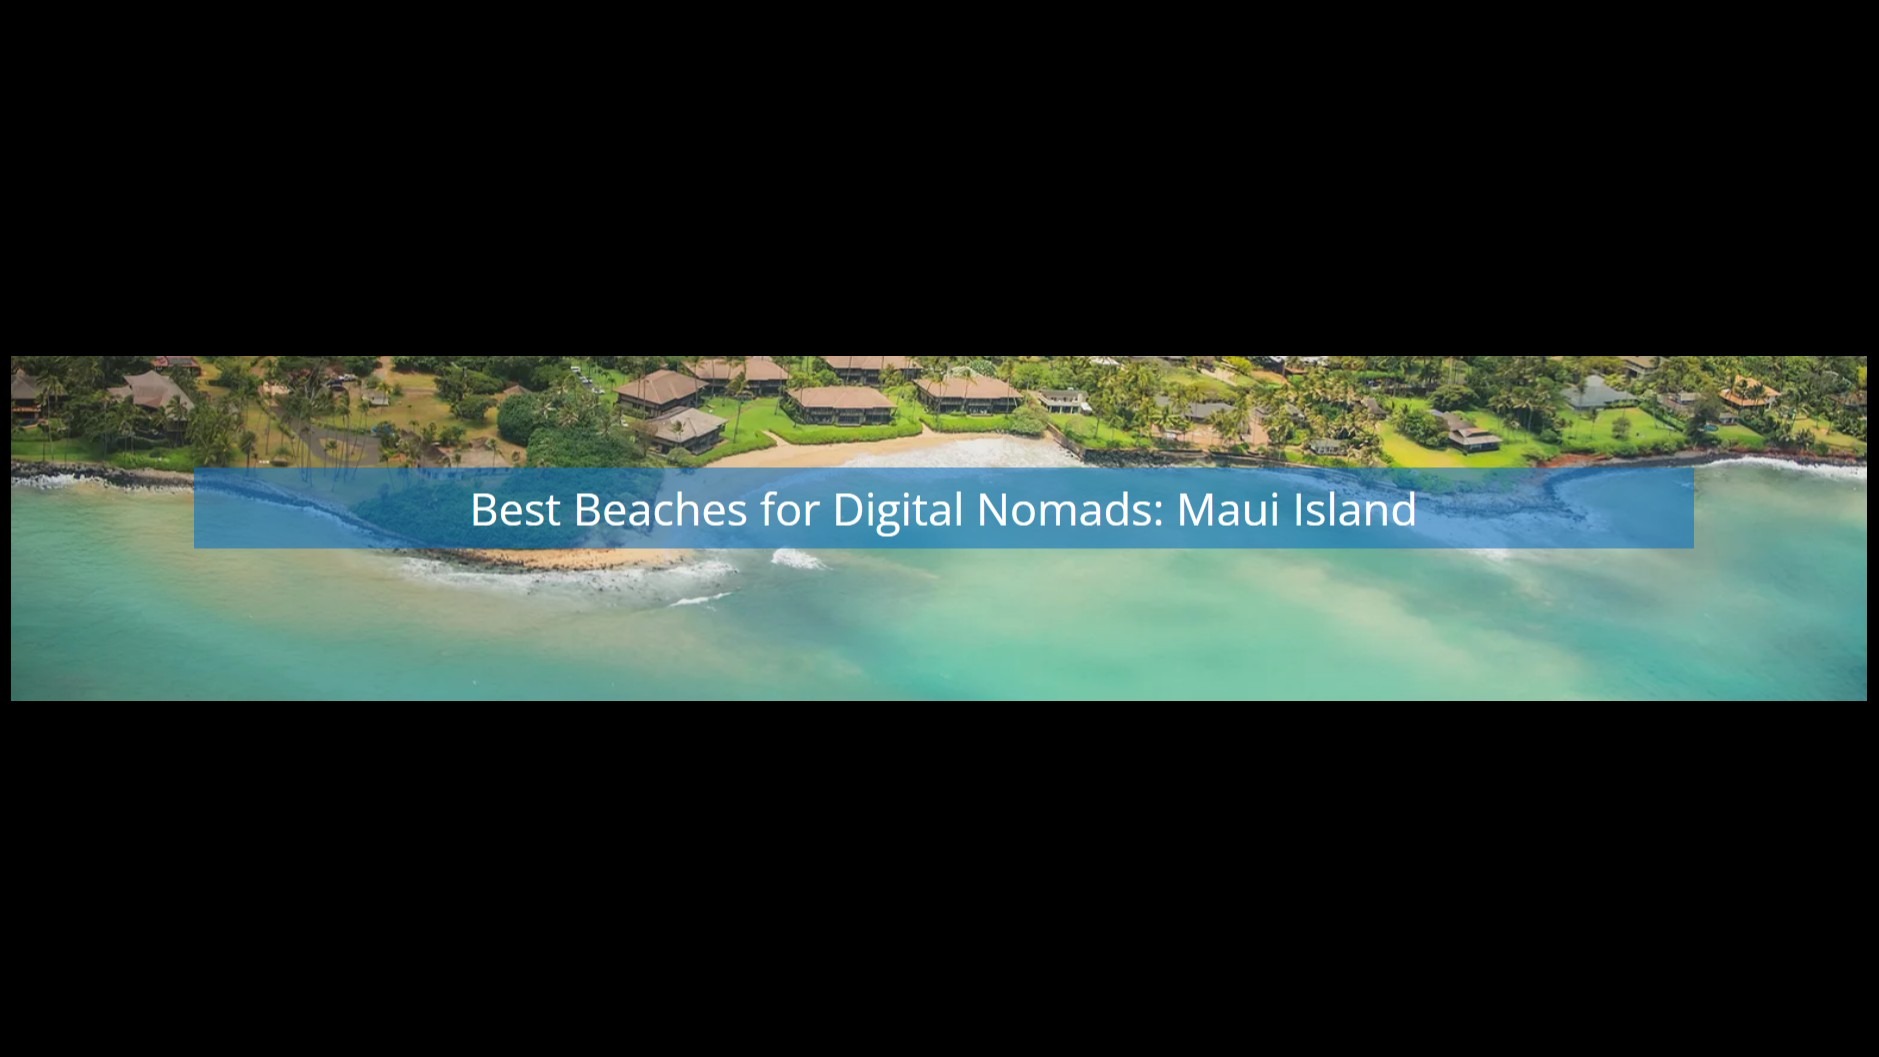 Remote Working On Maui Island: Discover Five Beaches That Digital Nomads Love